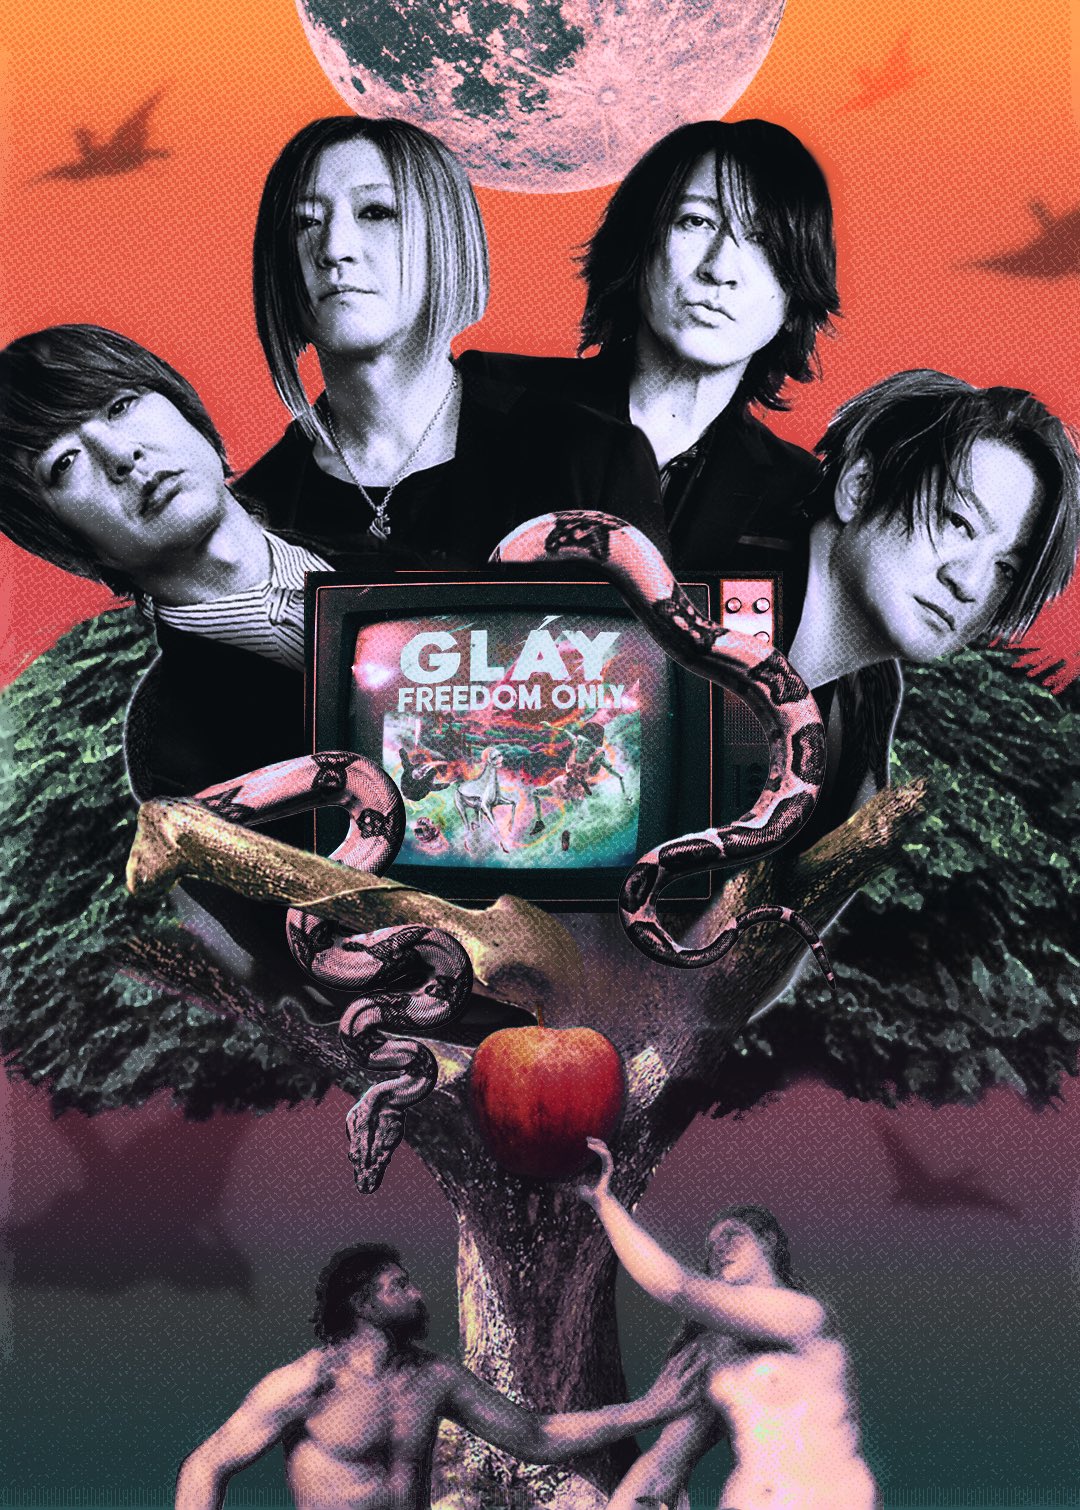 FREEDOMすぎるポスター展 | FREEDOM ONLY | GLAY